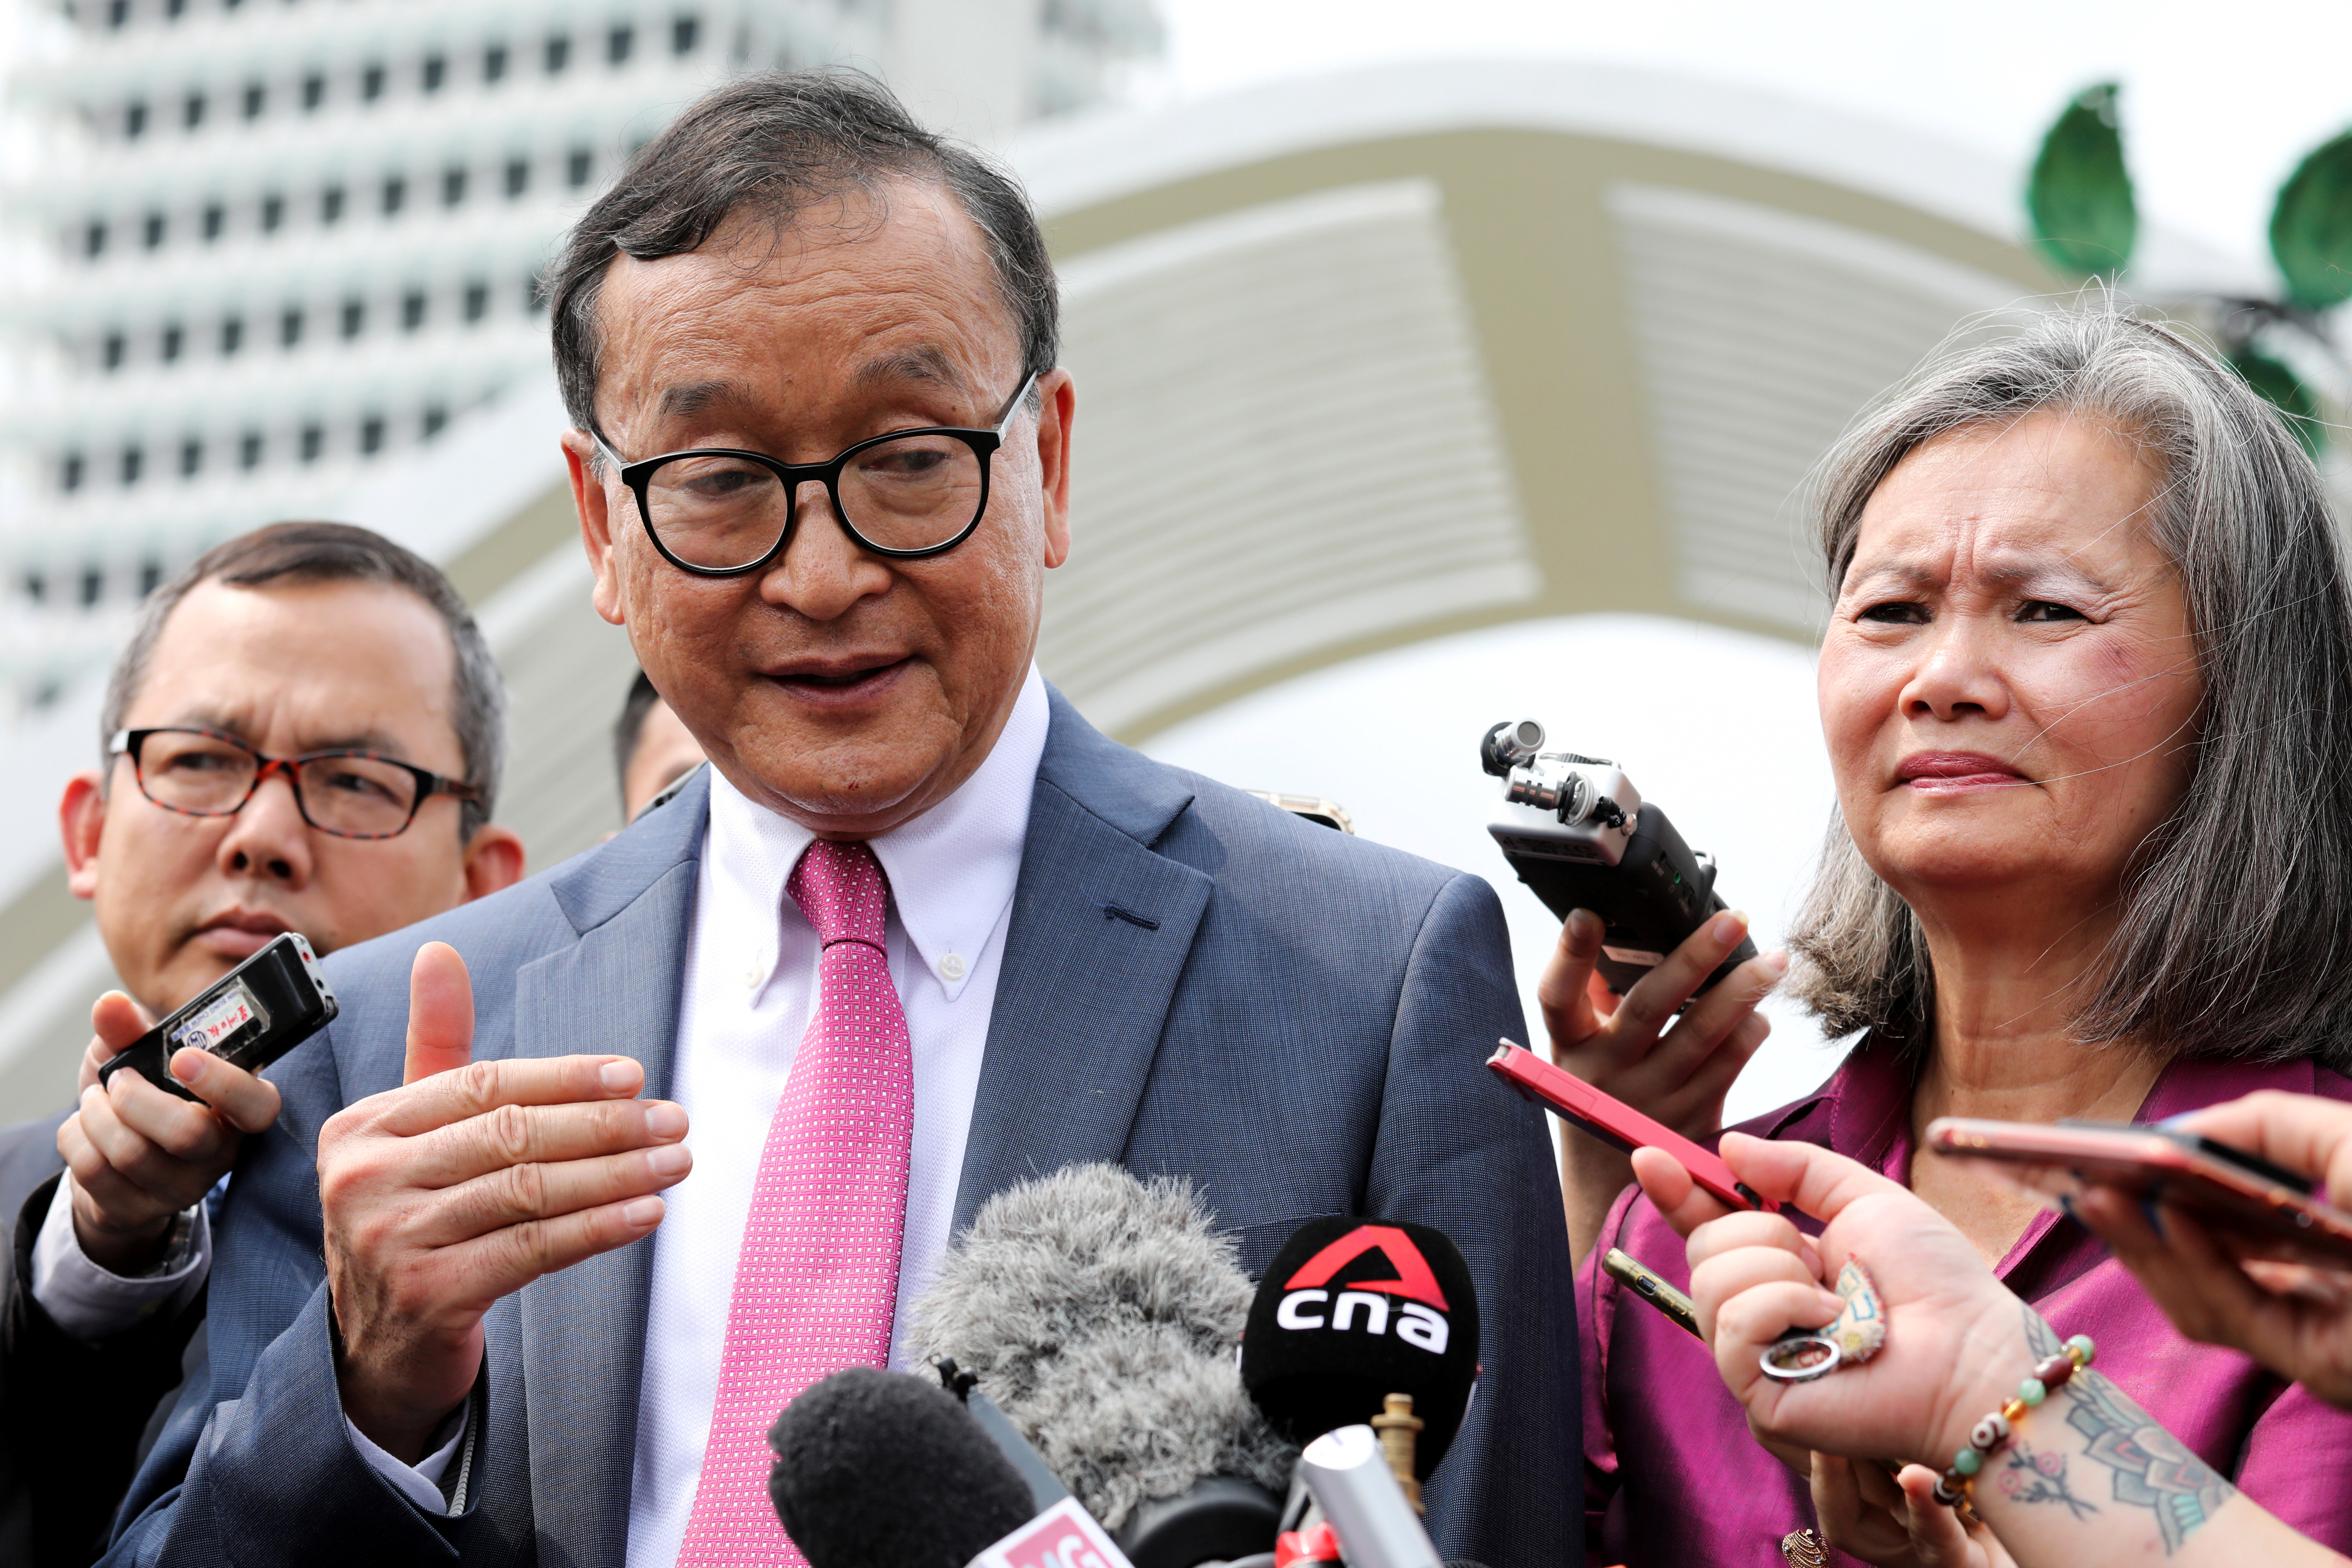 Self-exiled Cambodian opposition party founder Sam Rainsy and Mu Sochua, Deputy President of the Cambodia National Rescue Party (CNRP), speak to members of the media in Kuala Lumpur